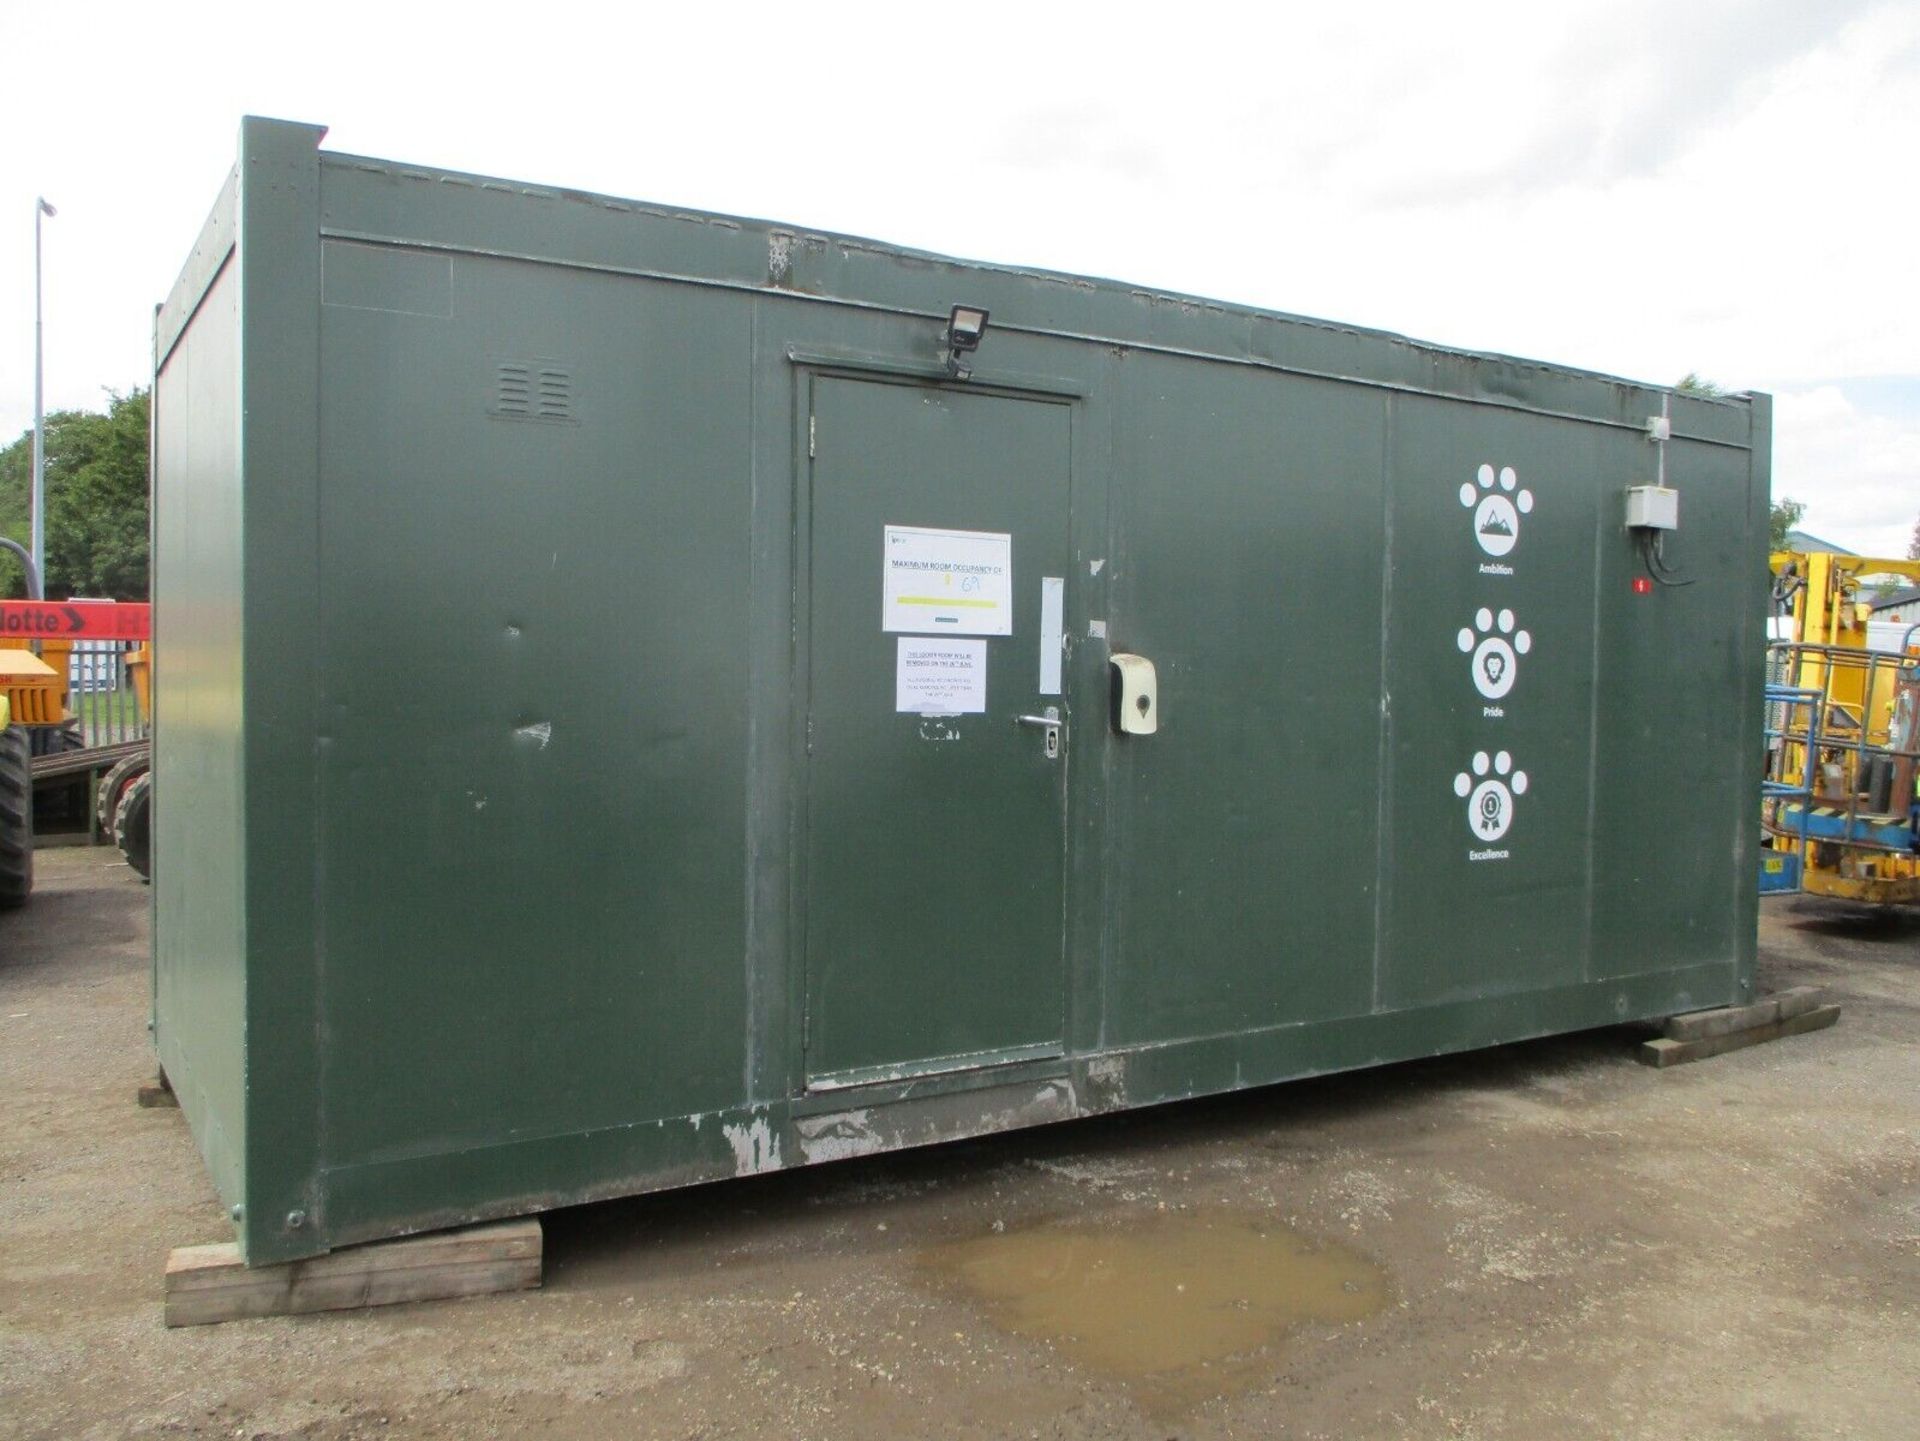 20X8FT SECURE SHIPPING CONTAINER: YOUR MOBILE OFFICE SPACE